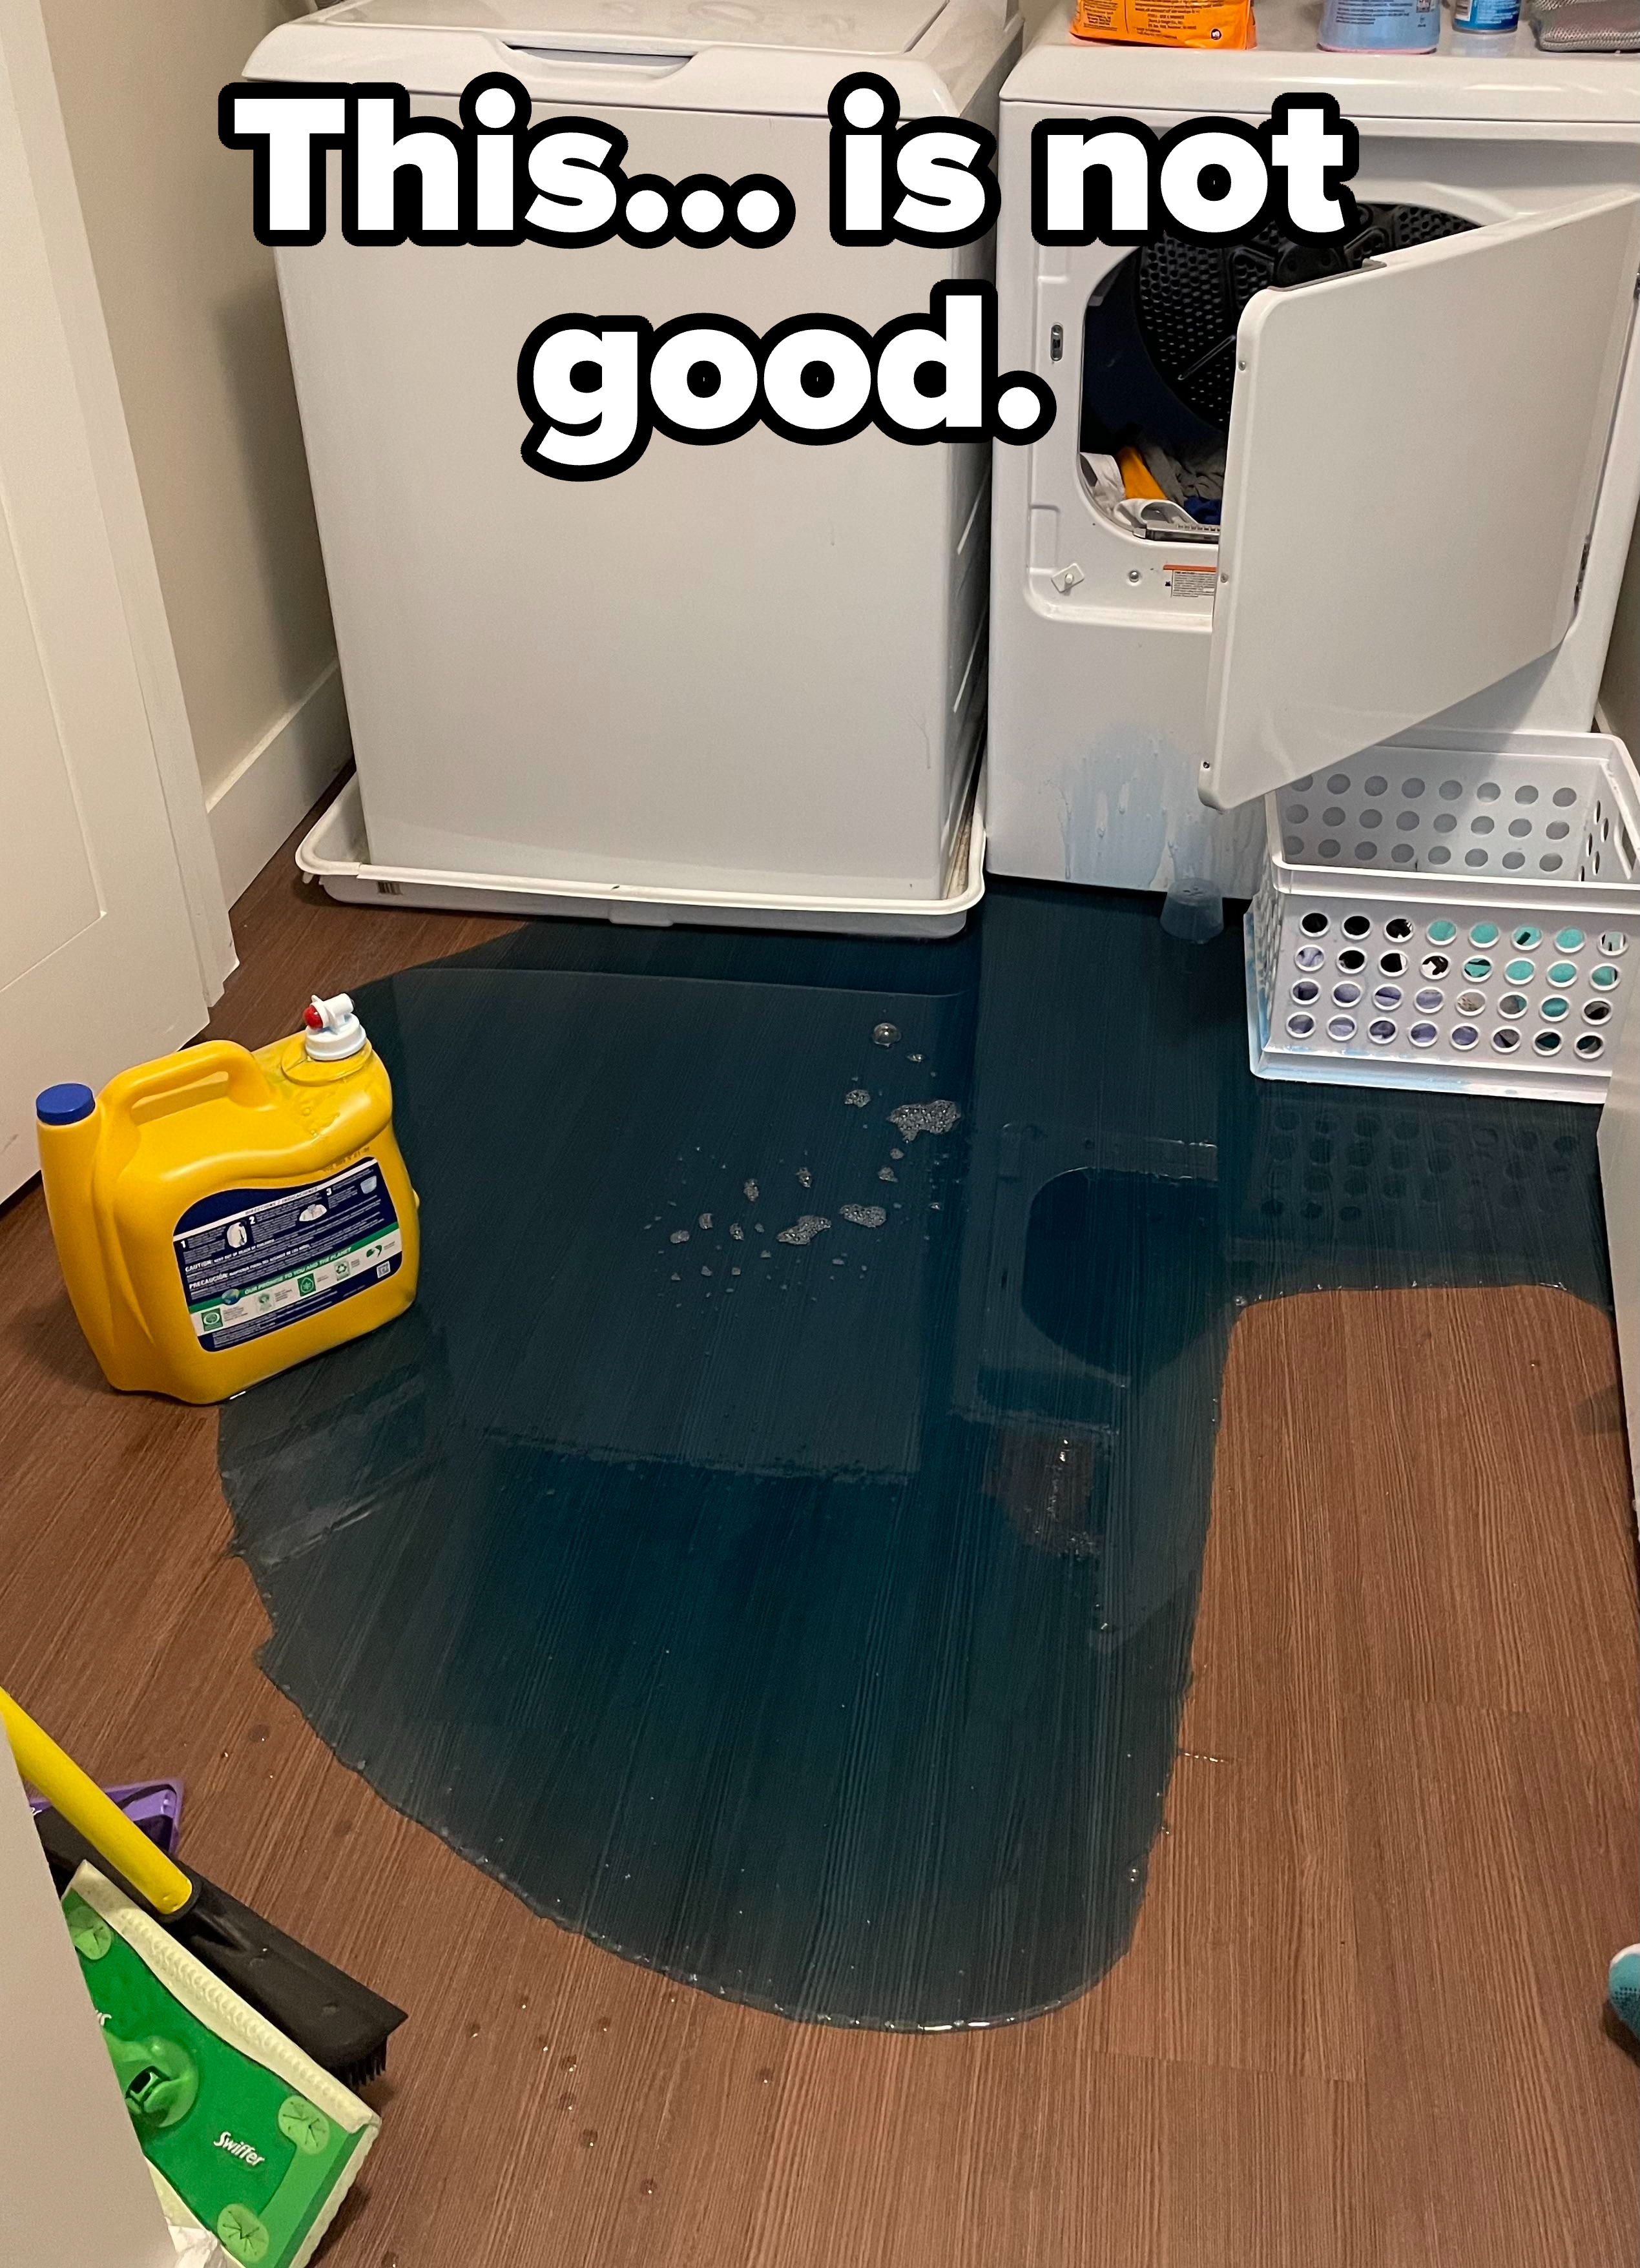 Washing machine leaks on floor in a utility room; laundry items and detergent nearby